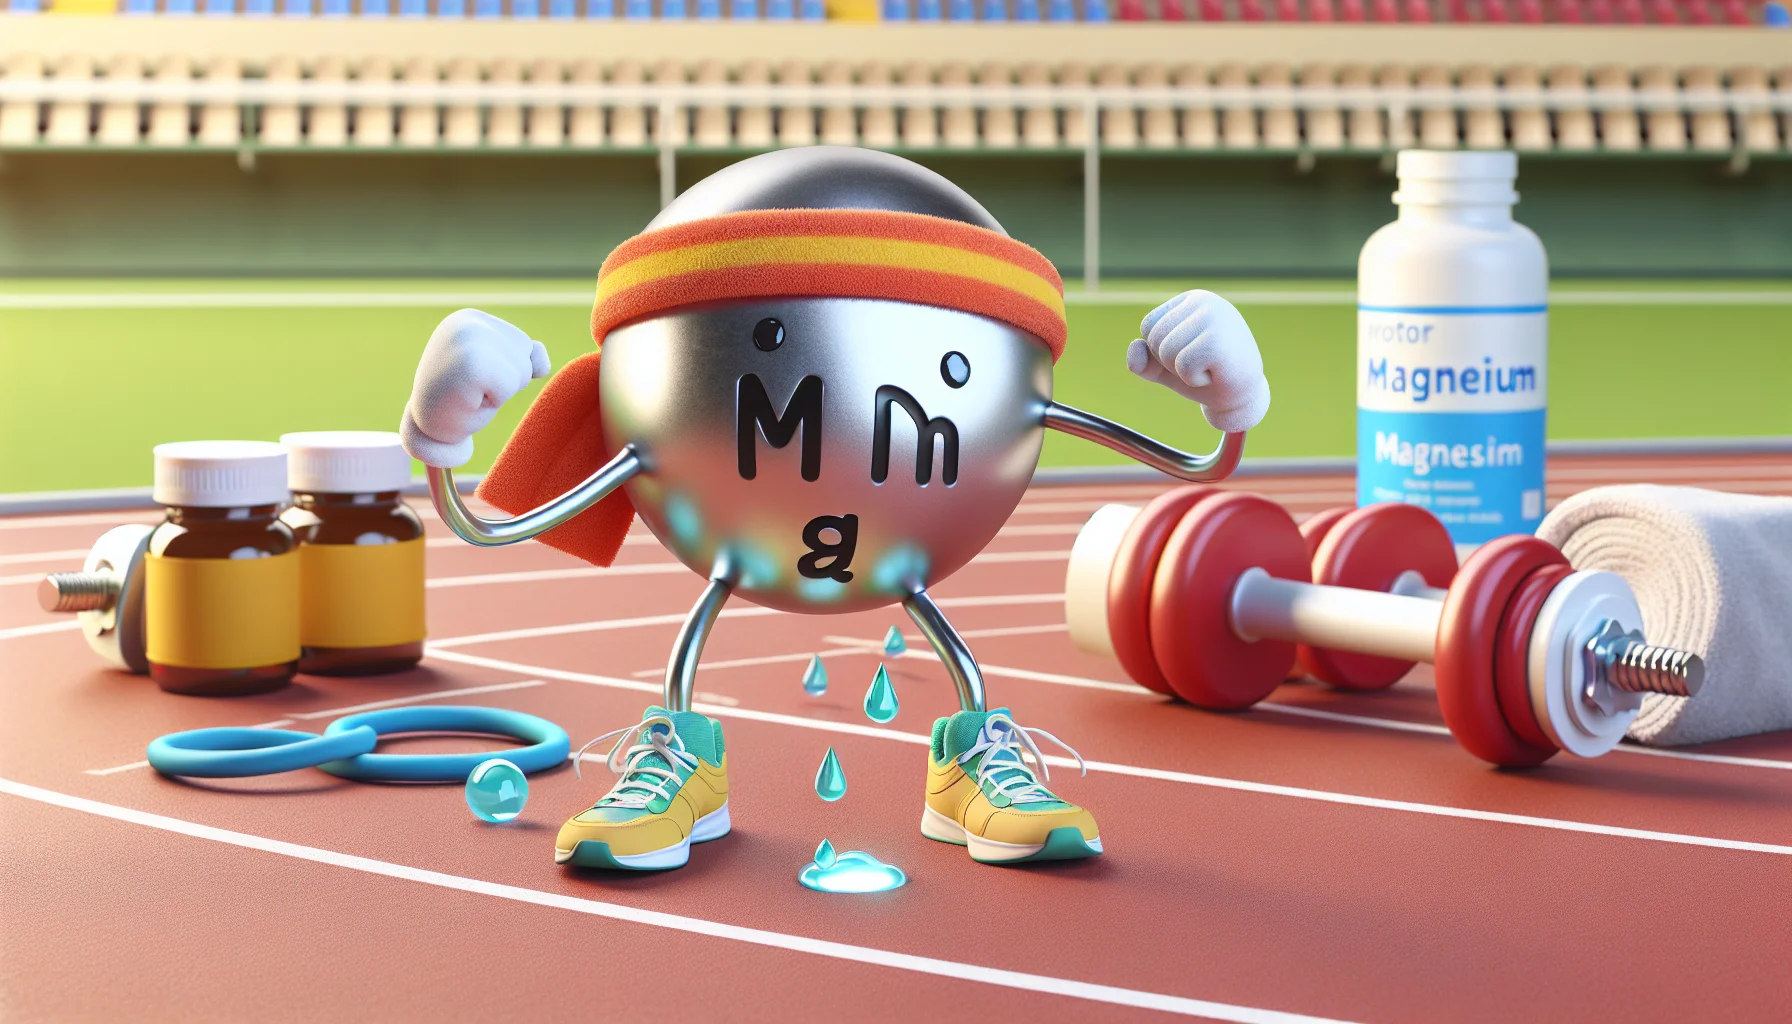 Create a visual representation of the Bohr model for Magnesium, humorously portrayed with a brightly colored headband and sneakers, as if it's getting ready to run a marathon. The model character is poised on a track, with little sweat droplets nearby. It's flexing its electron arms, radiating a sort of cheerful bravado. In the background, place a bottle of mineral supplements alongside sports equipment such as dumbbells and a skipping rope. The environment should be light-hearted and encouraging, aiming to promote the concept of using mineral supplements for sports.